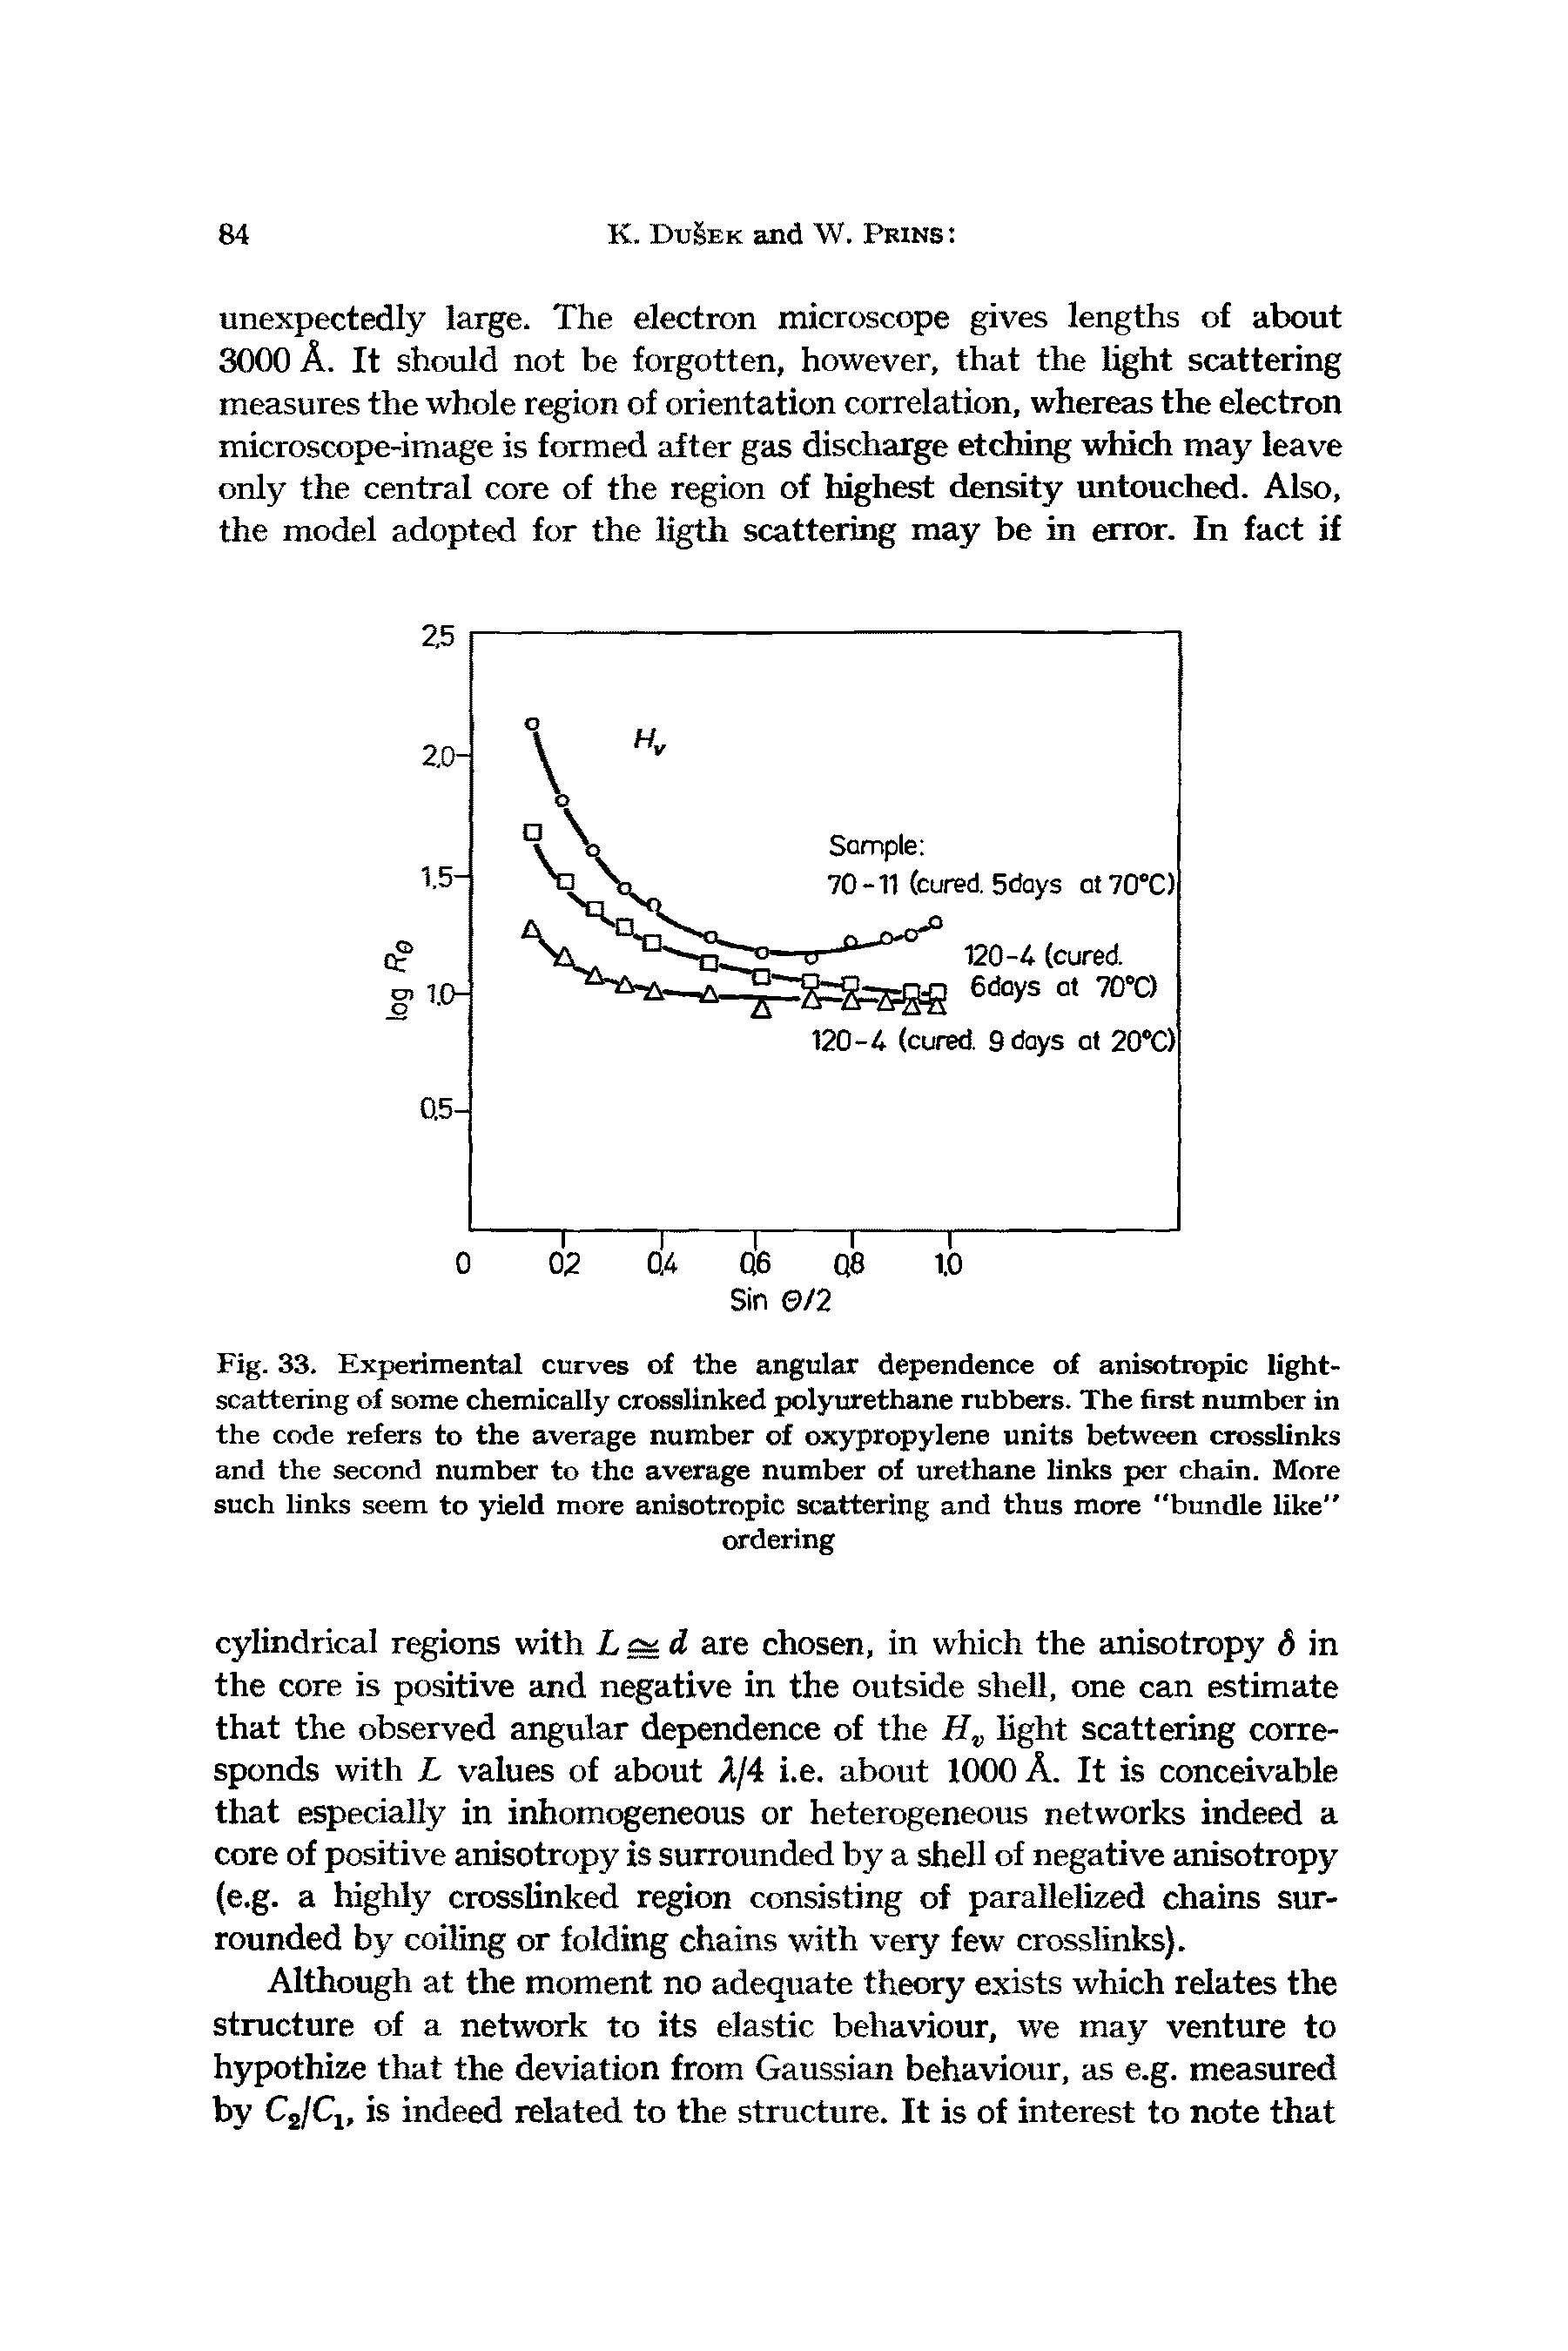 Fig. 33. Experimental curves of the angular dependence of anisotropic light-scattering of some chemically crosslinked polyurethane rubbers. The first number in the code refers to the average number of oxypropylene units between crosslinks and the second number to the average number of urethane links per chain. More such links seem to yield more anisotropic scattering and thus more "bundle like"...